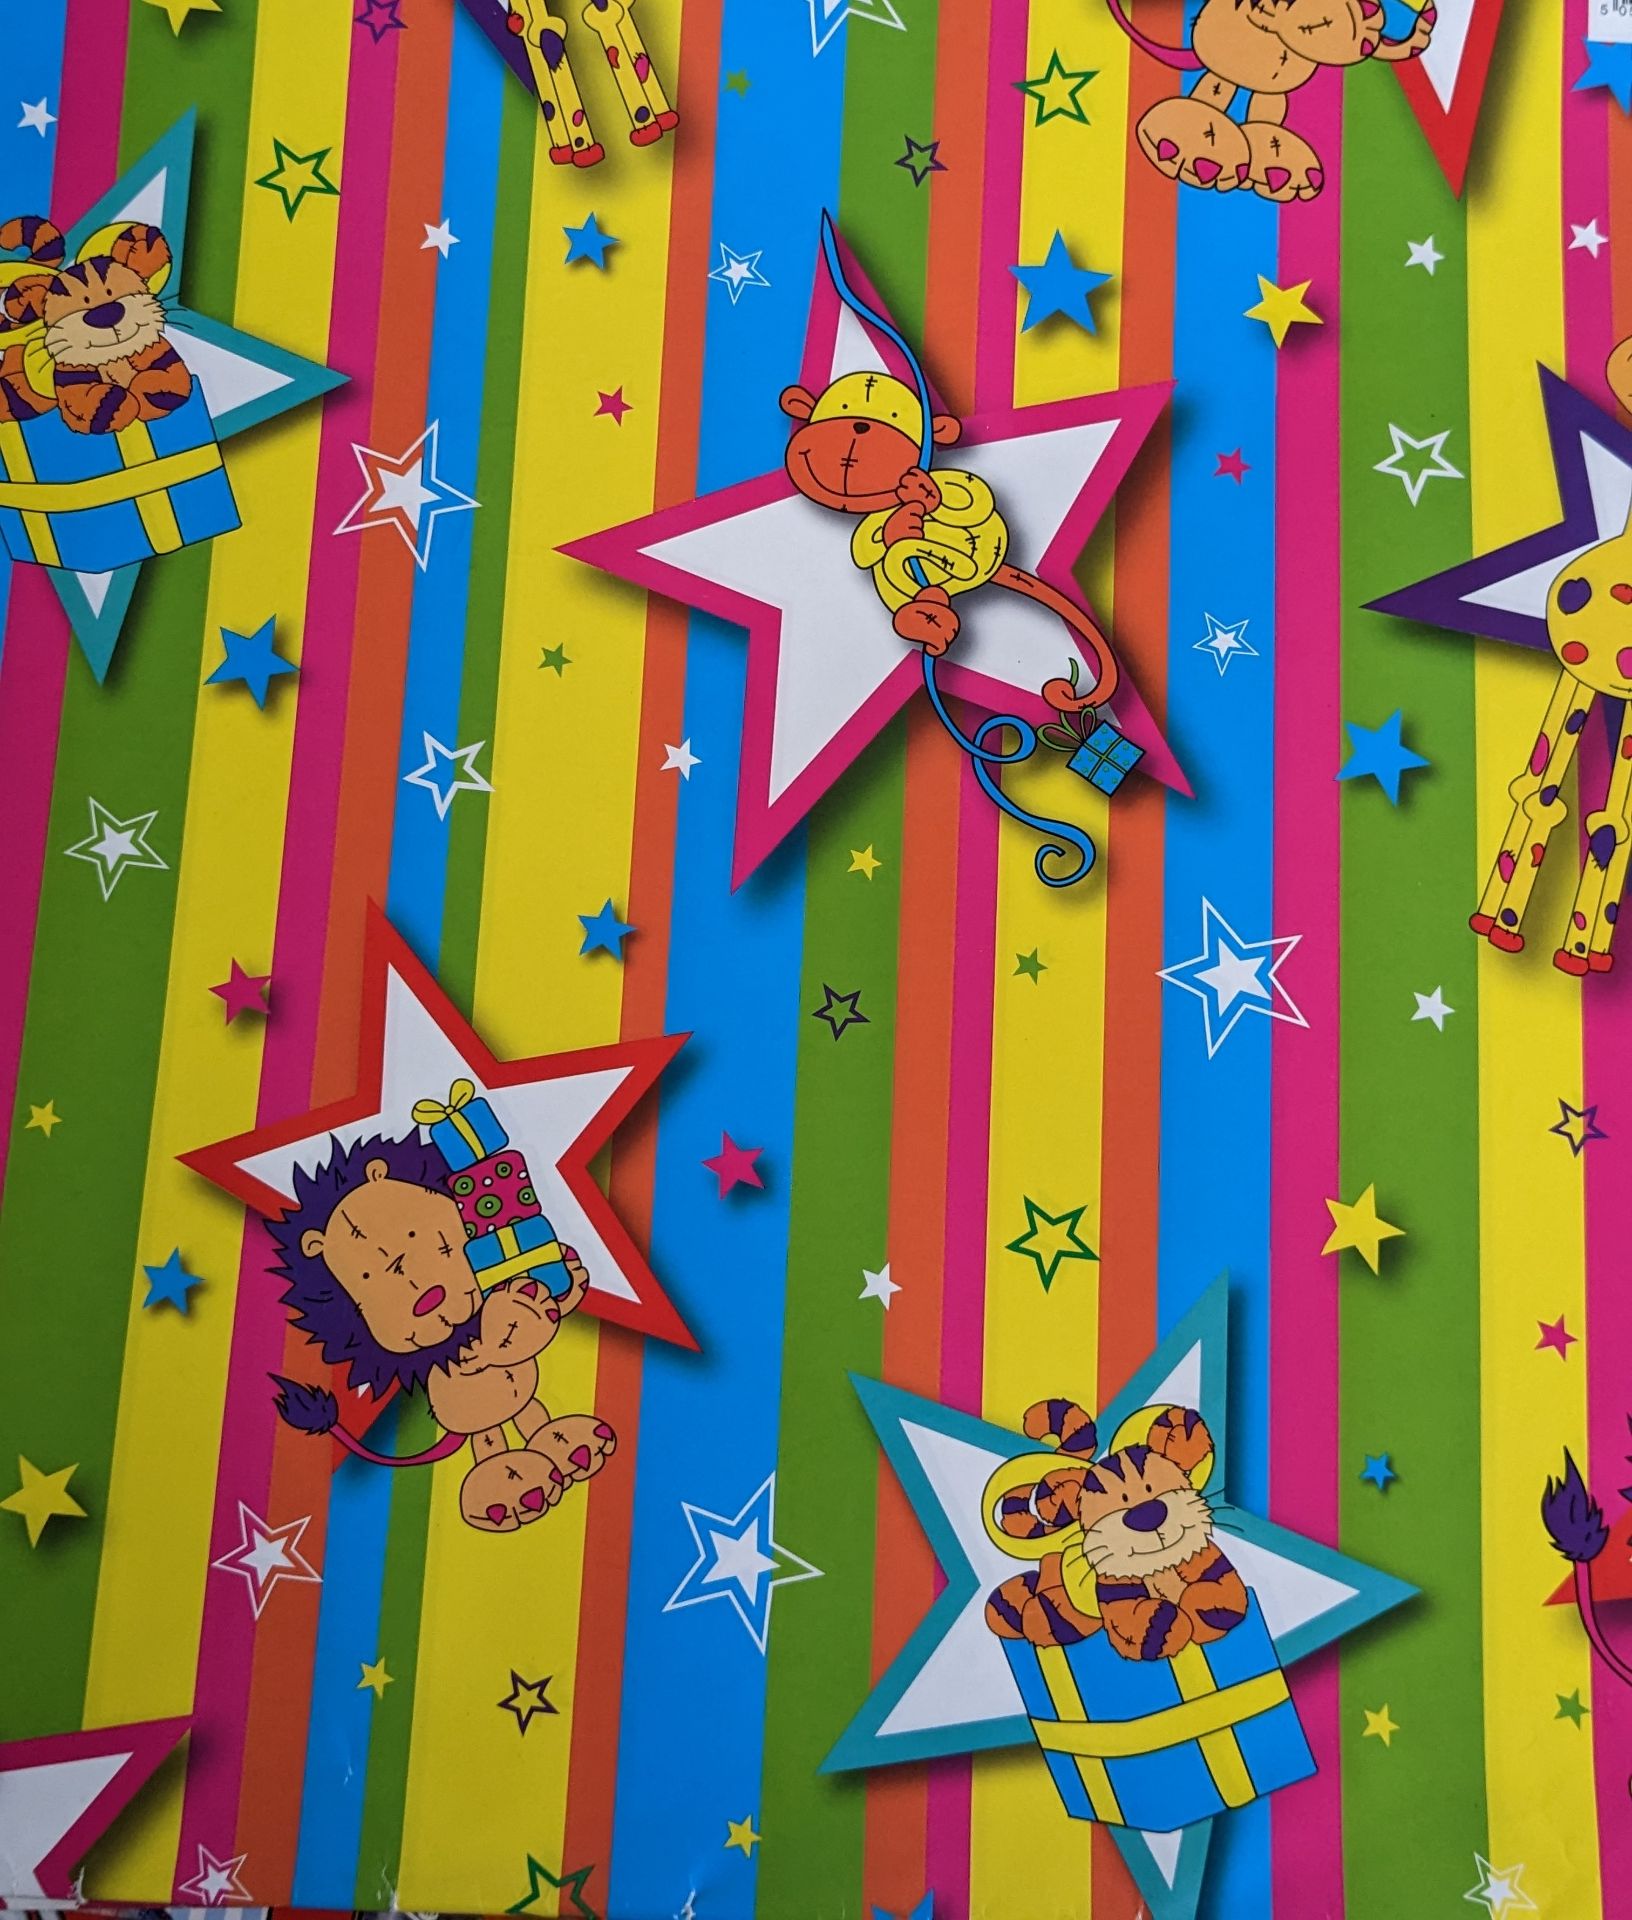 100 Sheets of Gift Wrapping Paper. - Image 4 of 8